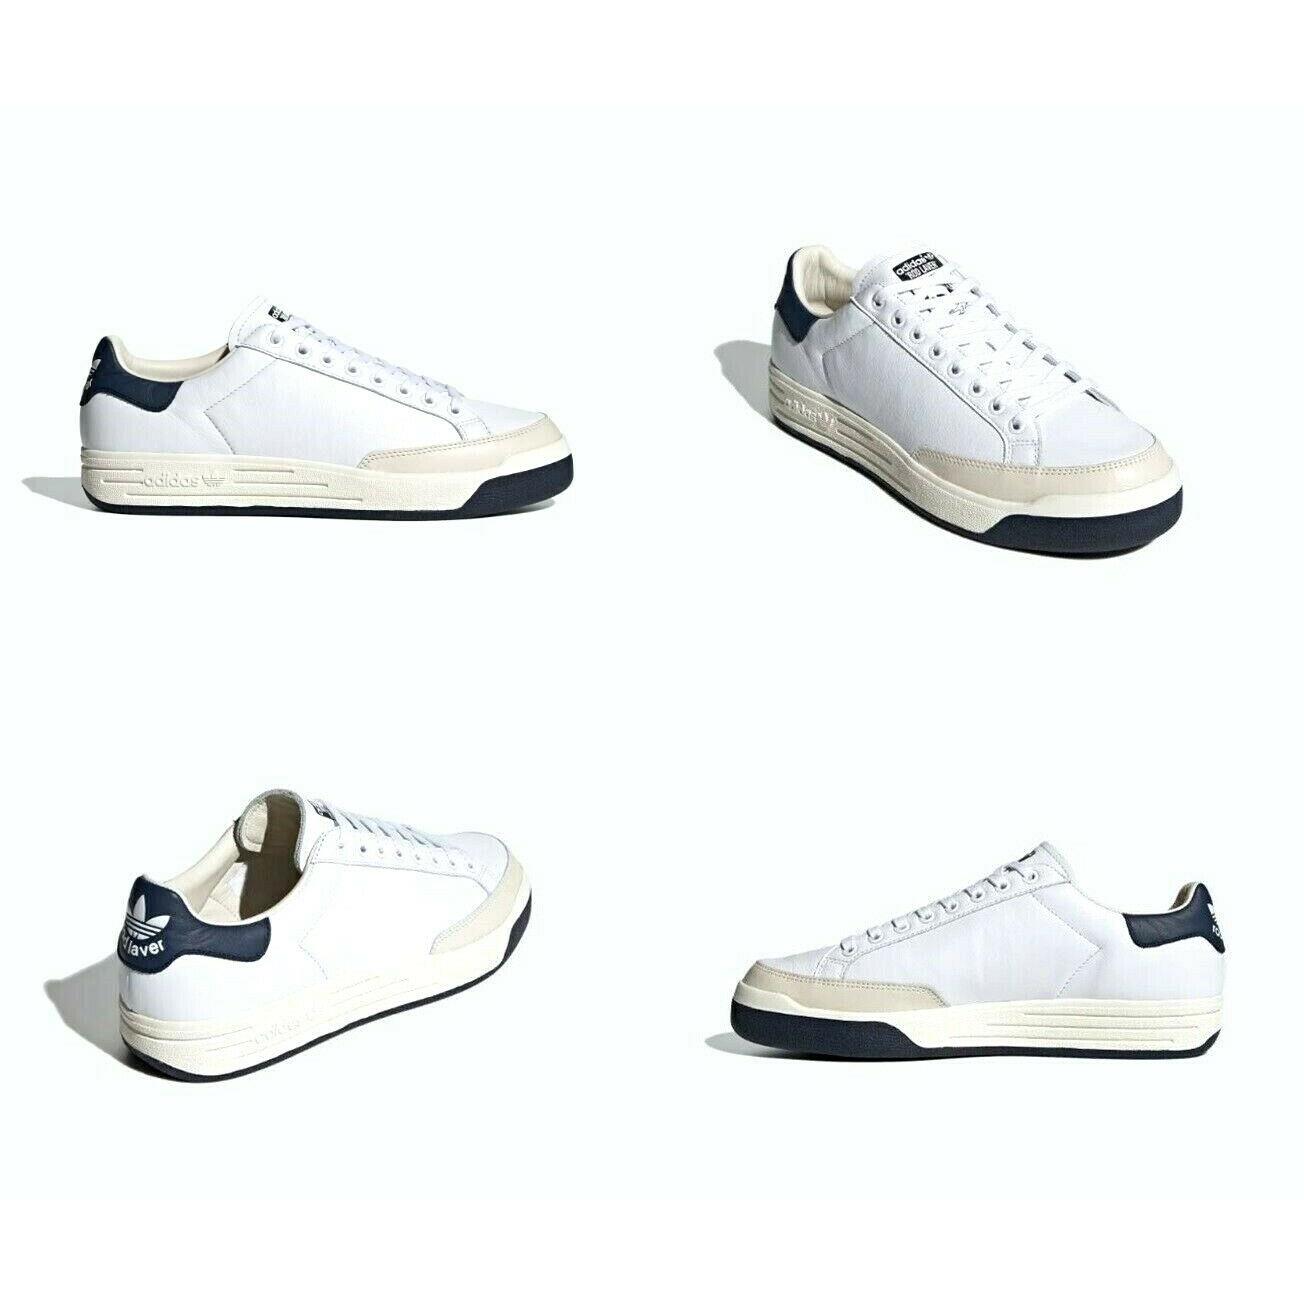 Adidas Rod Laver White / Collegiate Navy Leather Shoes Mens Size 7 FX5606